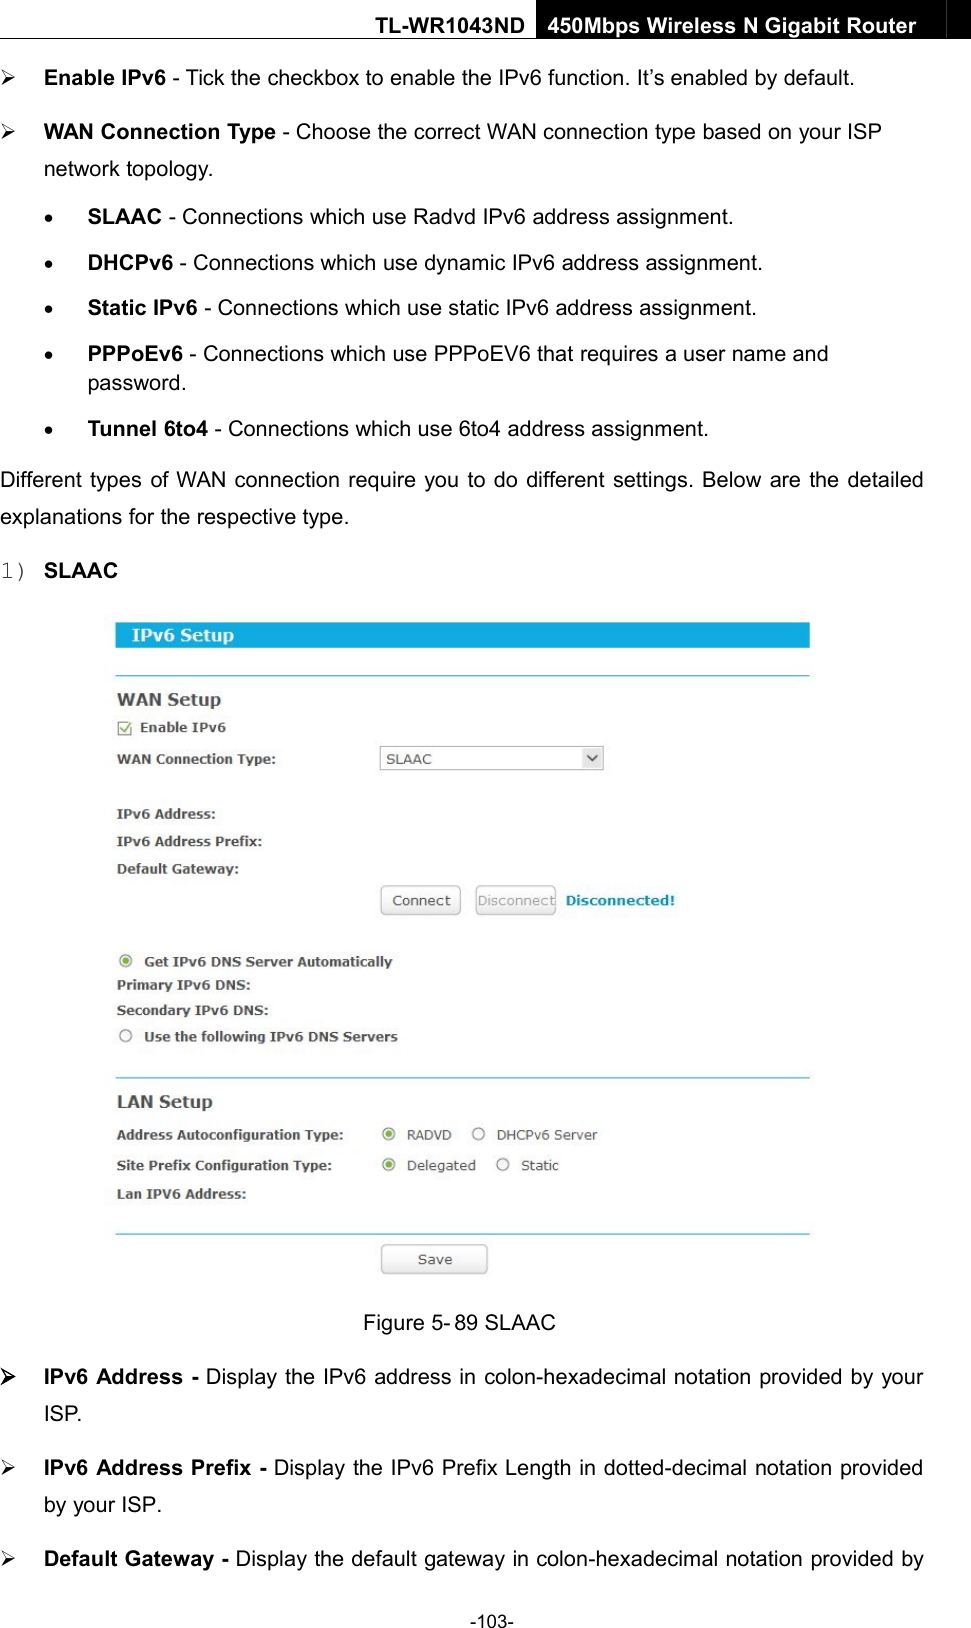 -103-TL-WR1043ND450Mbps Wireless N Gigabit RouterEnable IPv6 - Tick the checkbox to enable the IPv6 function. It’s enabled by default.WAN Connection Type - Choose the correct WAN connection type based on your ISPnetwork topology.SLAAC - Connections which use Radvd IPv6 address assignment.DHCPv6 - Connections which use dynamic IPv6 address assignment.Static IPv6 - Connections which use static IPv6 address assignment.PPPoEv6 - Connections which use PPPoEV6 that requires a user name andpassword.Tunnel 6to4 - Connections which use 6to4 address assignment.Different types of WAN connection require you to do different settings. Below are the detailedexplanations for the respective type.1) SLAACFigure 5- 89 SLAACIPv6 Address - Display the IPv6 address in colon-hexadecimal notation provided by yourISP.IPv6 Address Prefix - Display the IPv6 Prefix Length in dotted-decimal notation providedby your ISP.Default Gateway - Display the default gateway in colon-hexadecimal notation provided by